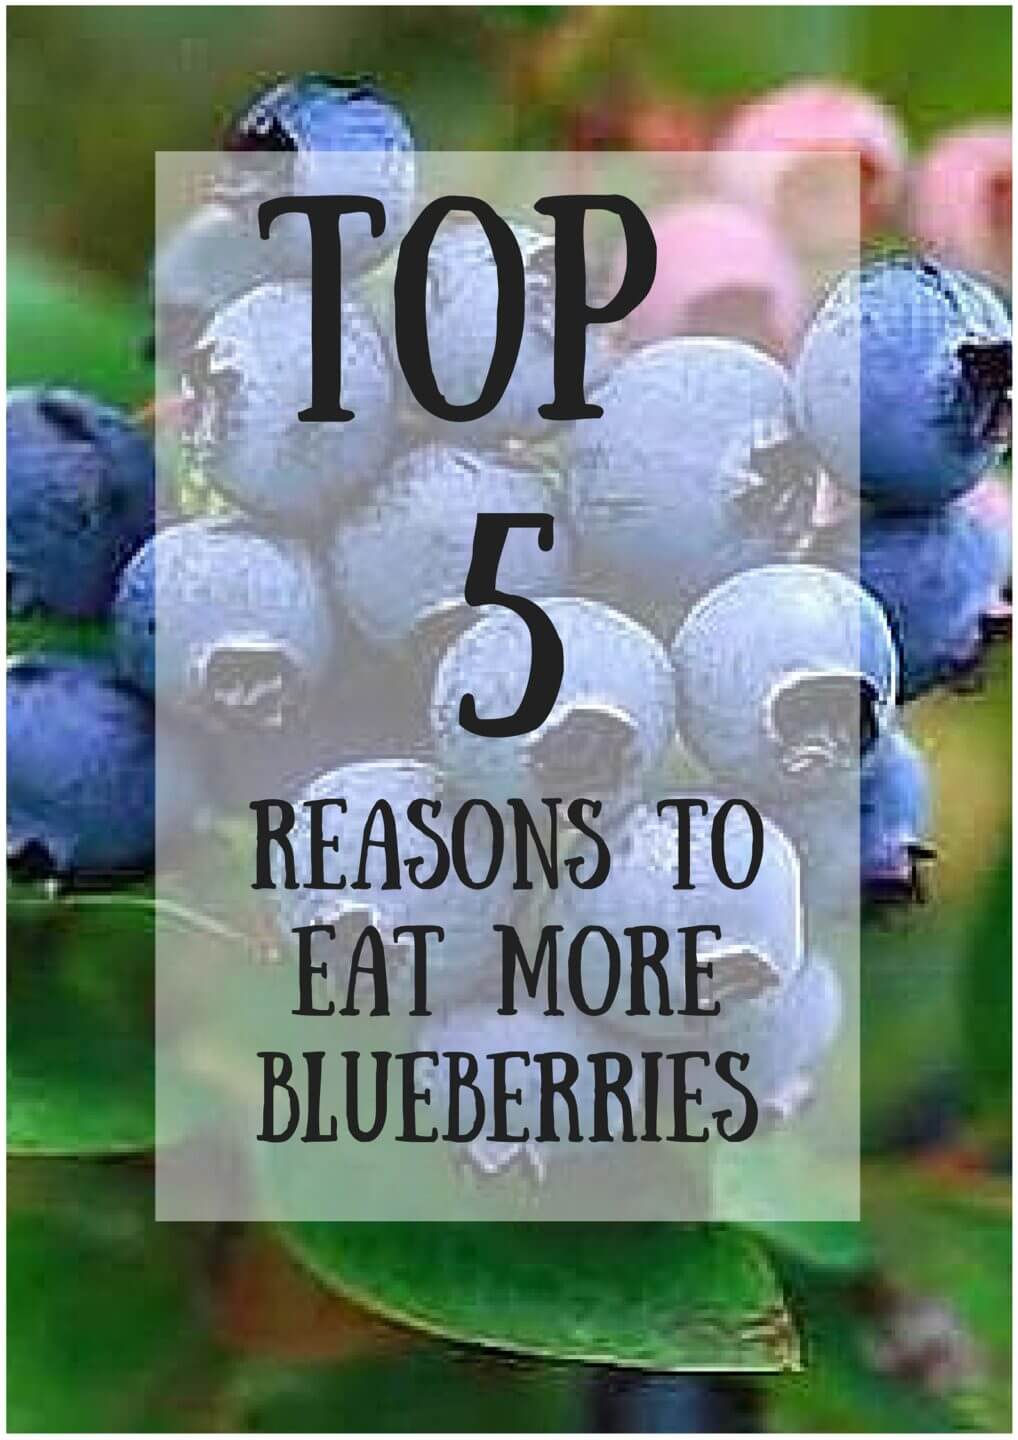 Top 5 Reasons to Eat More Blueberries - Wish Farms